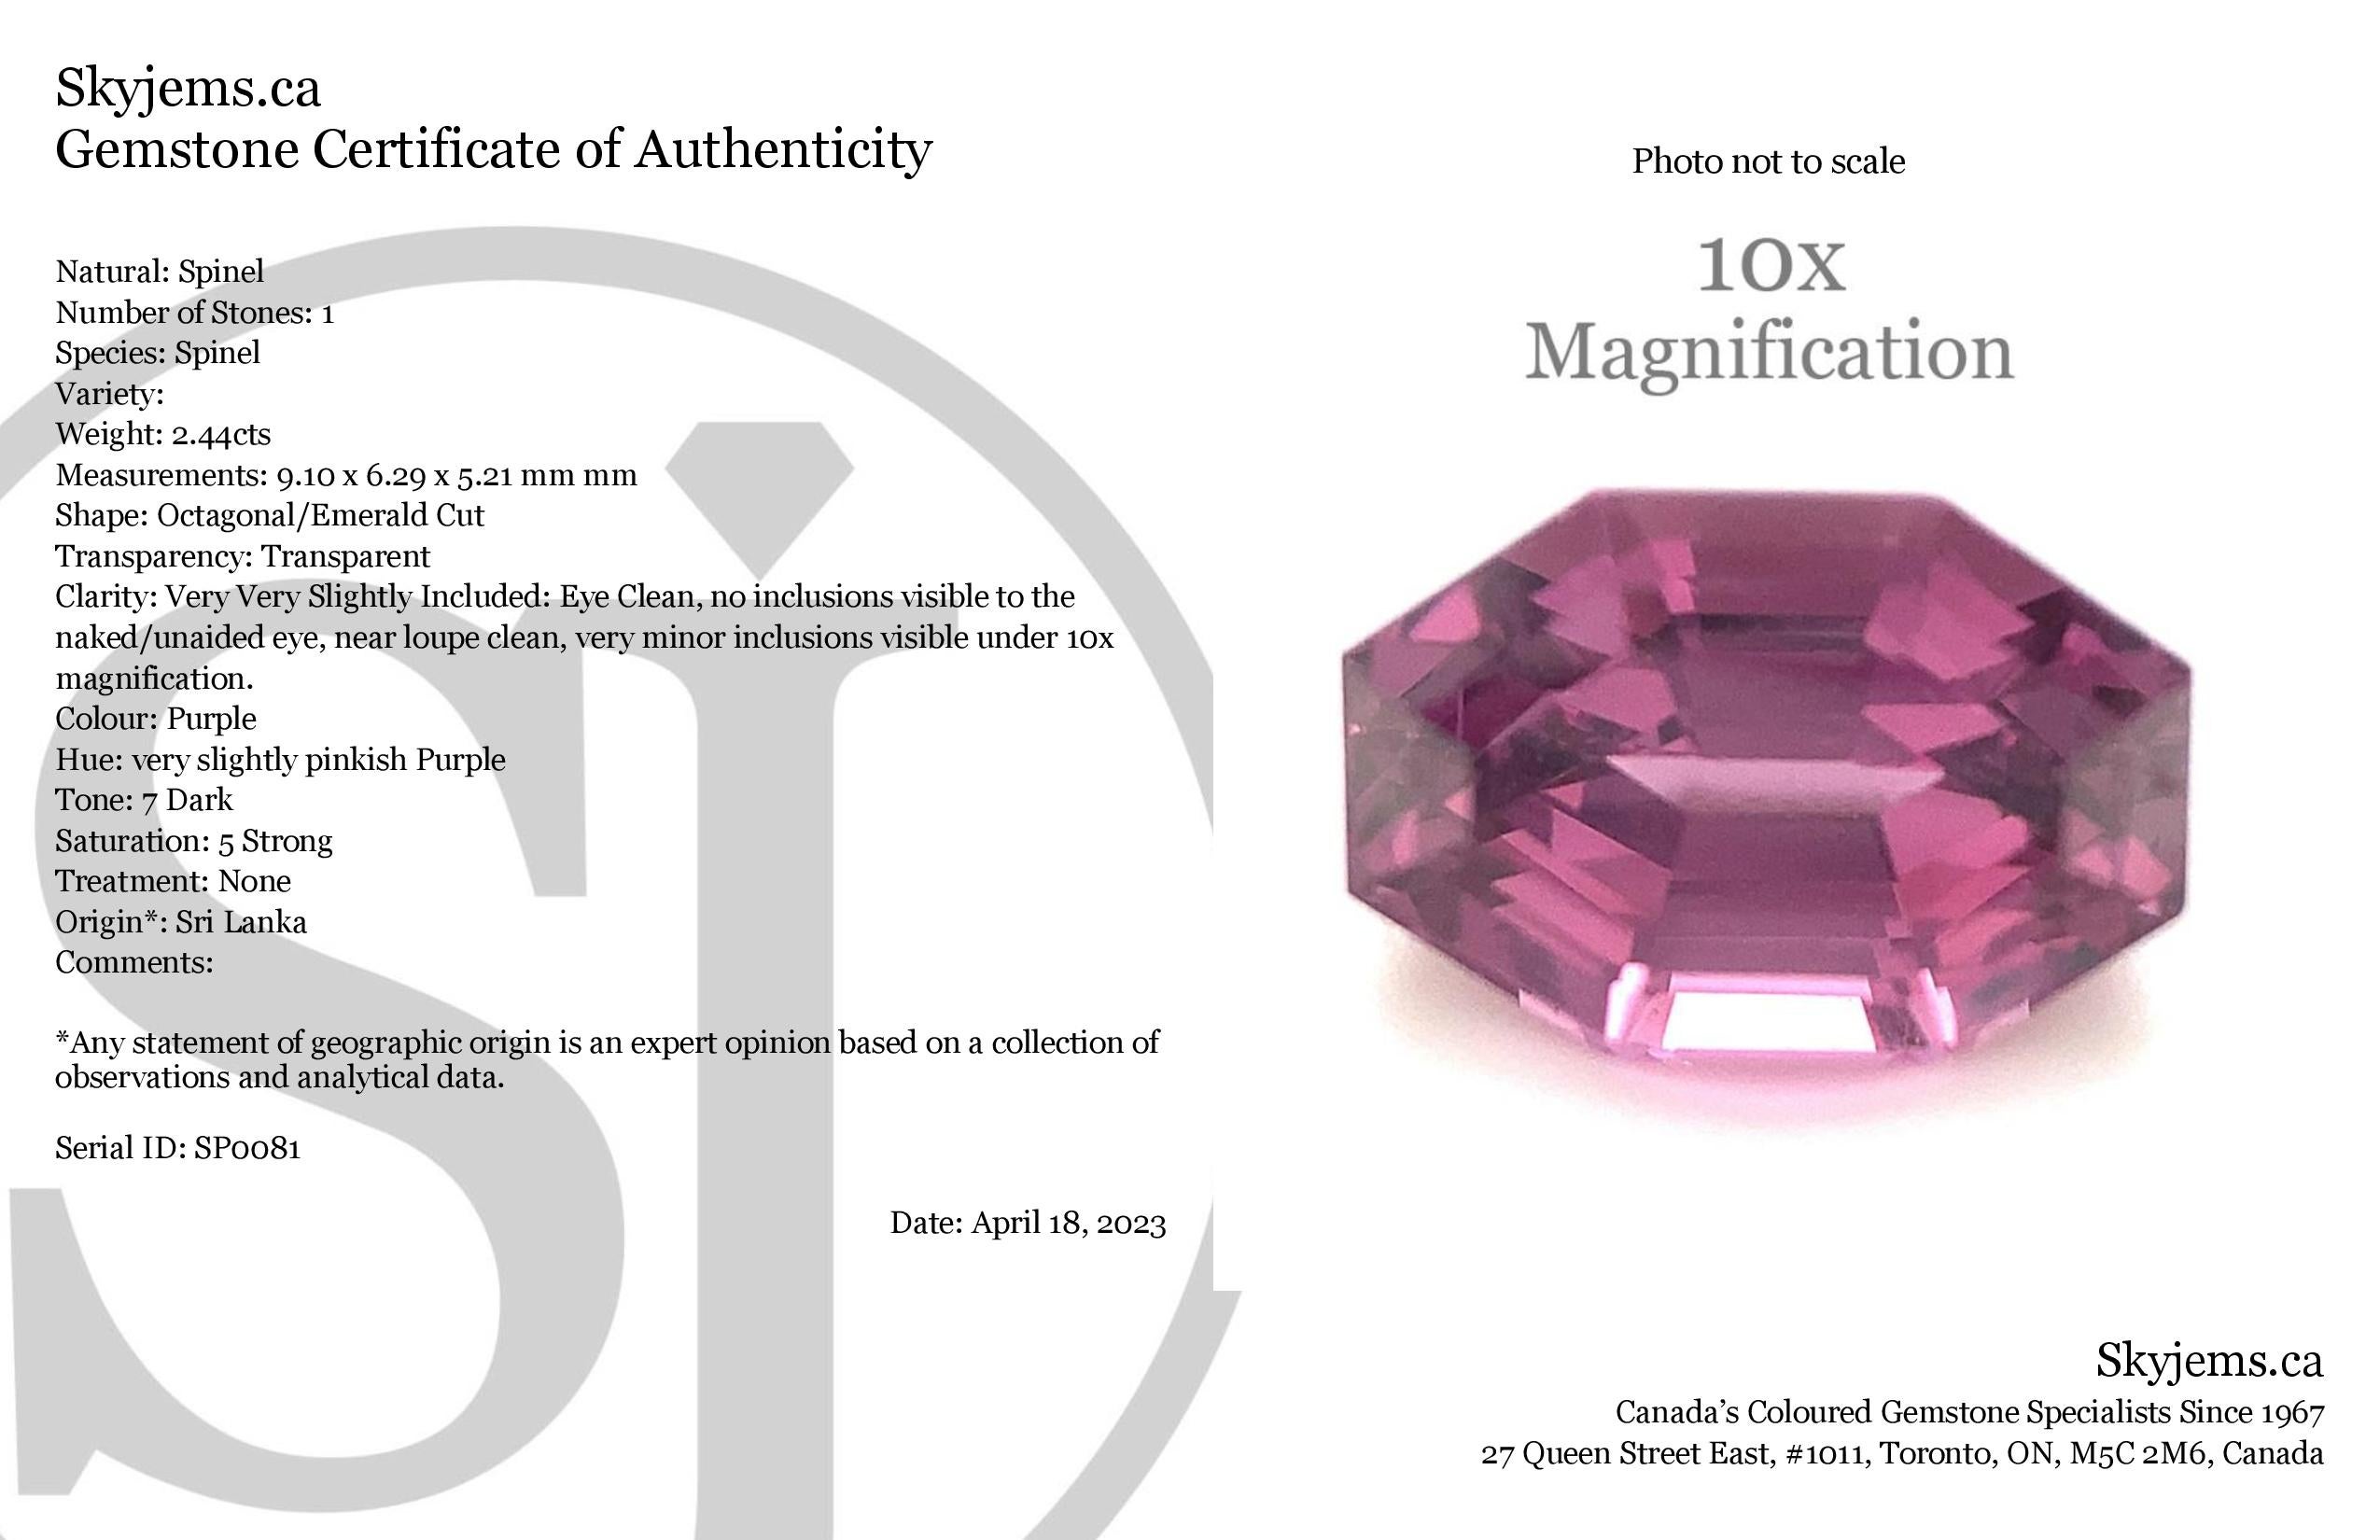 Description:

Gem Type: Spinel 
Number of Stones: 1
Weight: 2.44 cts
Measurements: 7.68 x 7.01 x 4.76 mm
Shape: Octagonal/Emerald Cut
Cutting Style Crown: Step Cut
Cutting Style Pavilion: Step Cut 
Transparency: Transparent
Clarity: Very Slightly